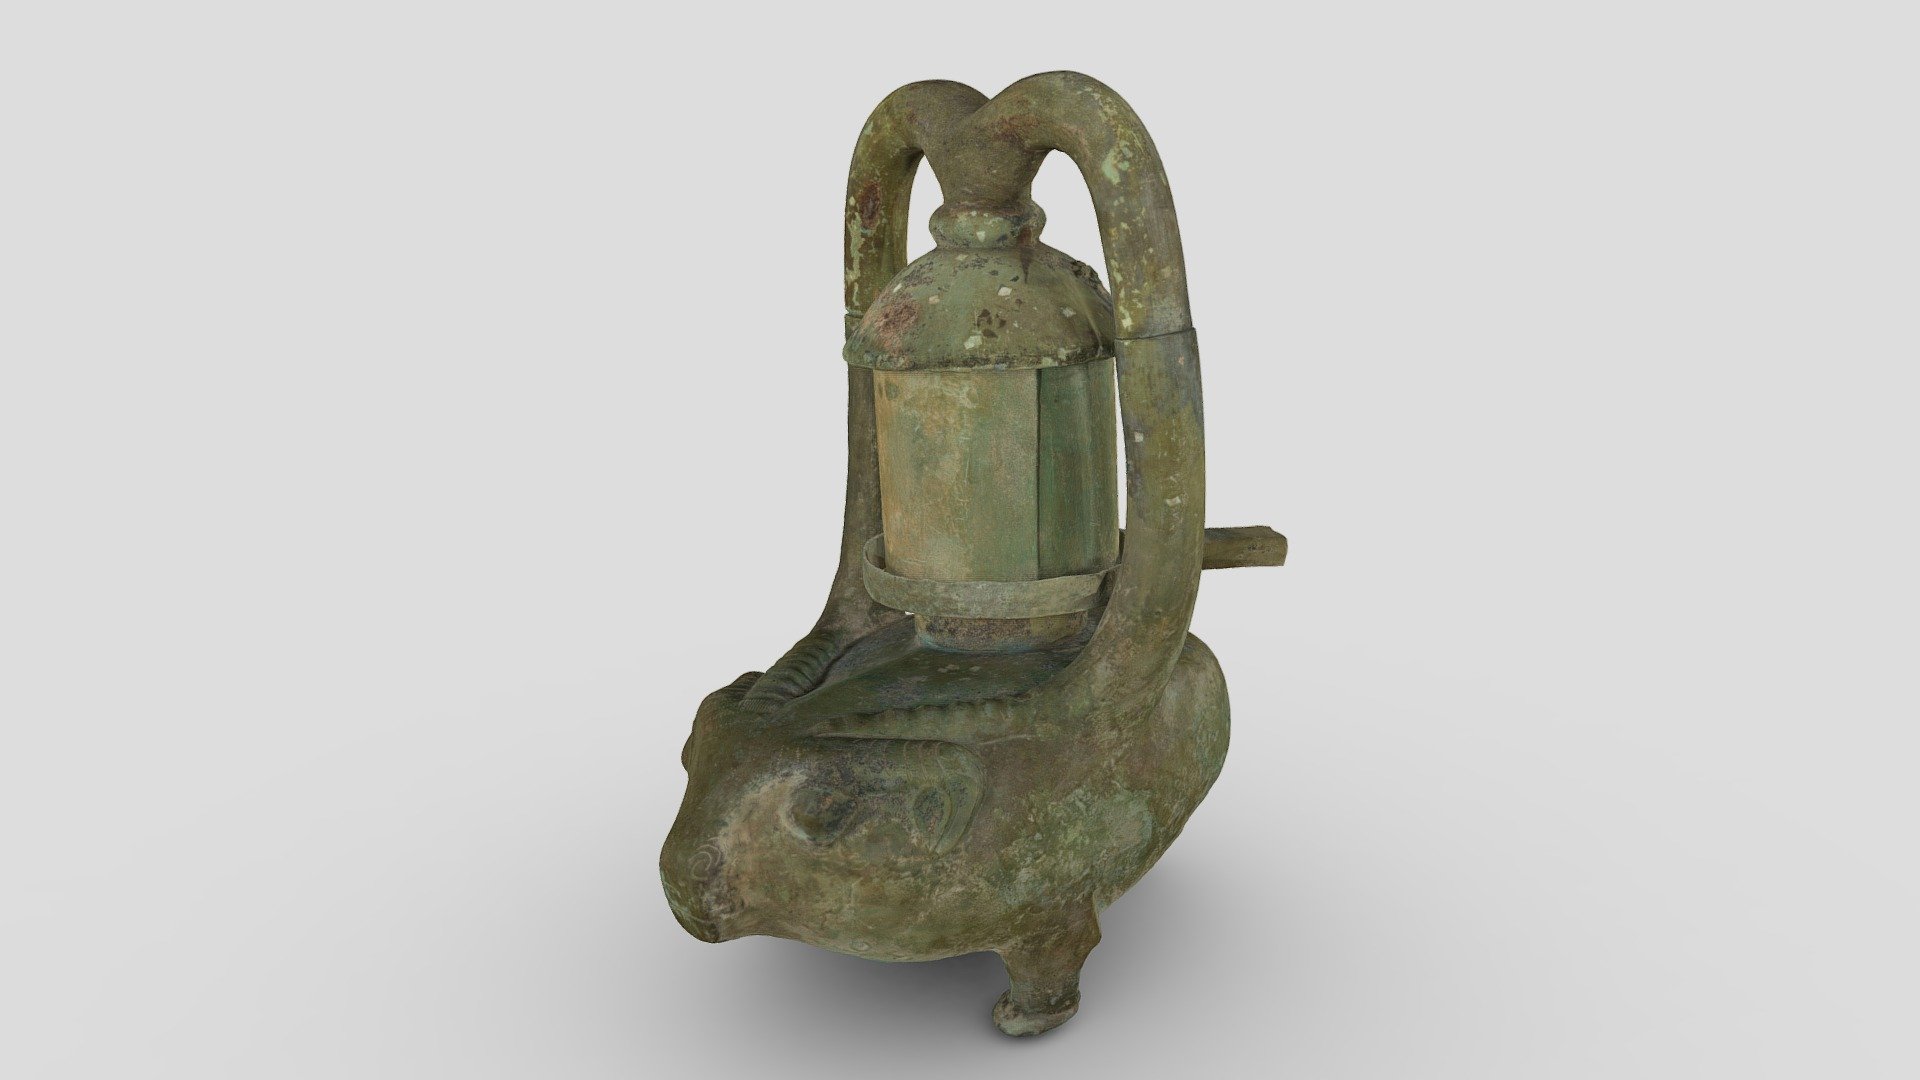 Captured by #idetic from #weissag Processed via #agisoft Follow Christiane Zhao for more 3D photogrammetry content: https://www.linkedin.com/in/christiane-zhao-a073b4130/

Feel free to message me in LinkedIn if you are looking for a 1.6 GB 3D point cloud of this model 3d model